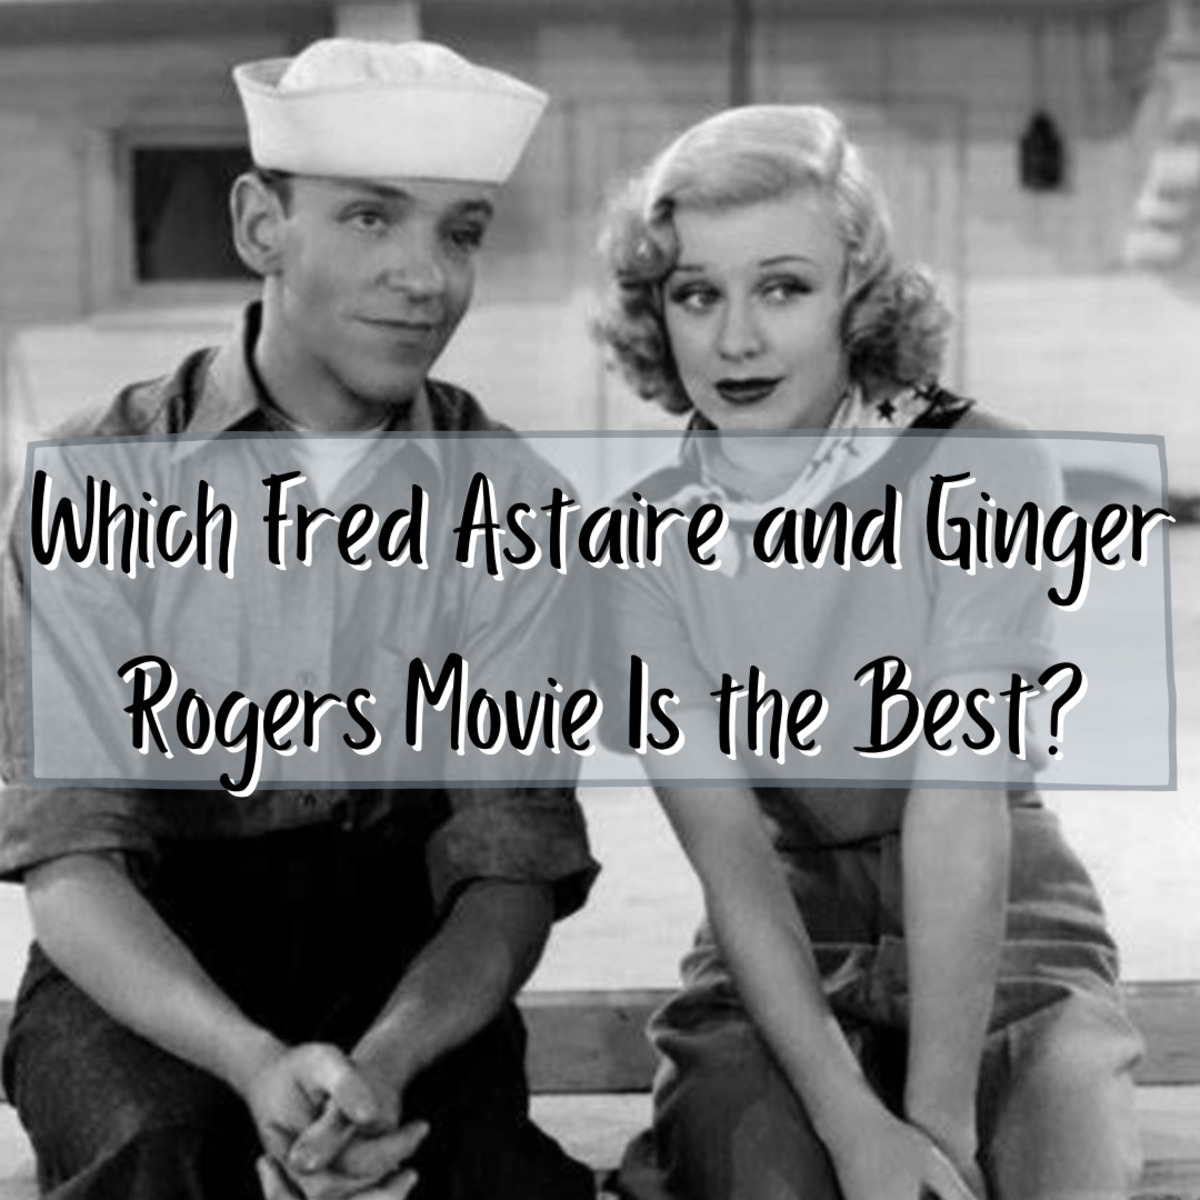 Read on for an in-depth look into the top 10 Fred Astaire and Ginger Rogers films of all time.